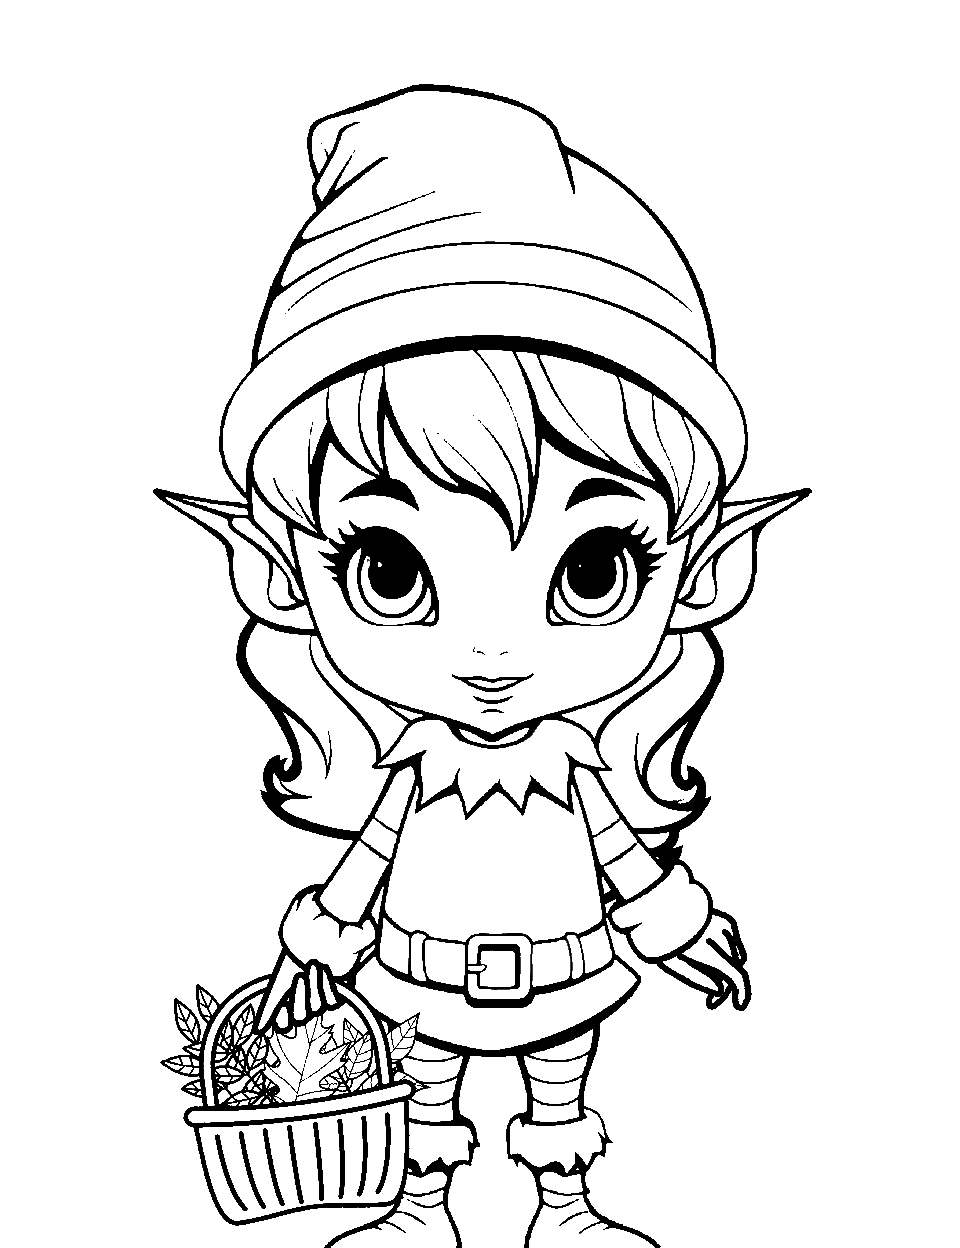 Forest Elf Gathering Herbs Coloring Page - An elf girl with a basket gathering herbs in the forest.